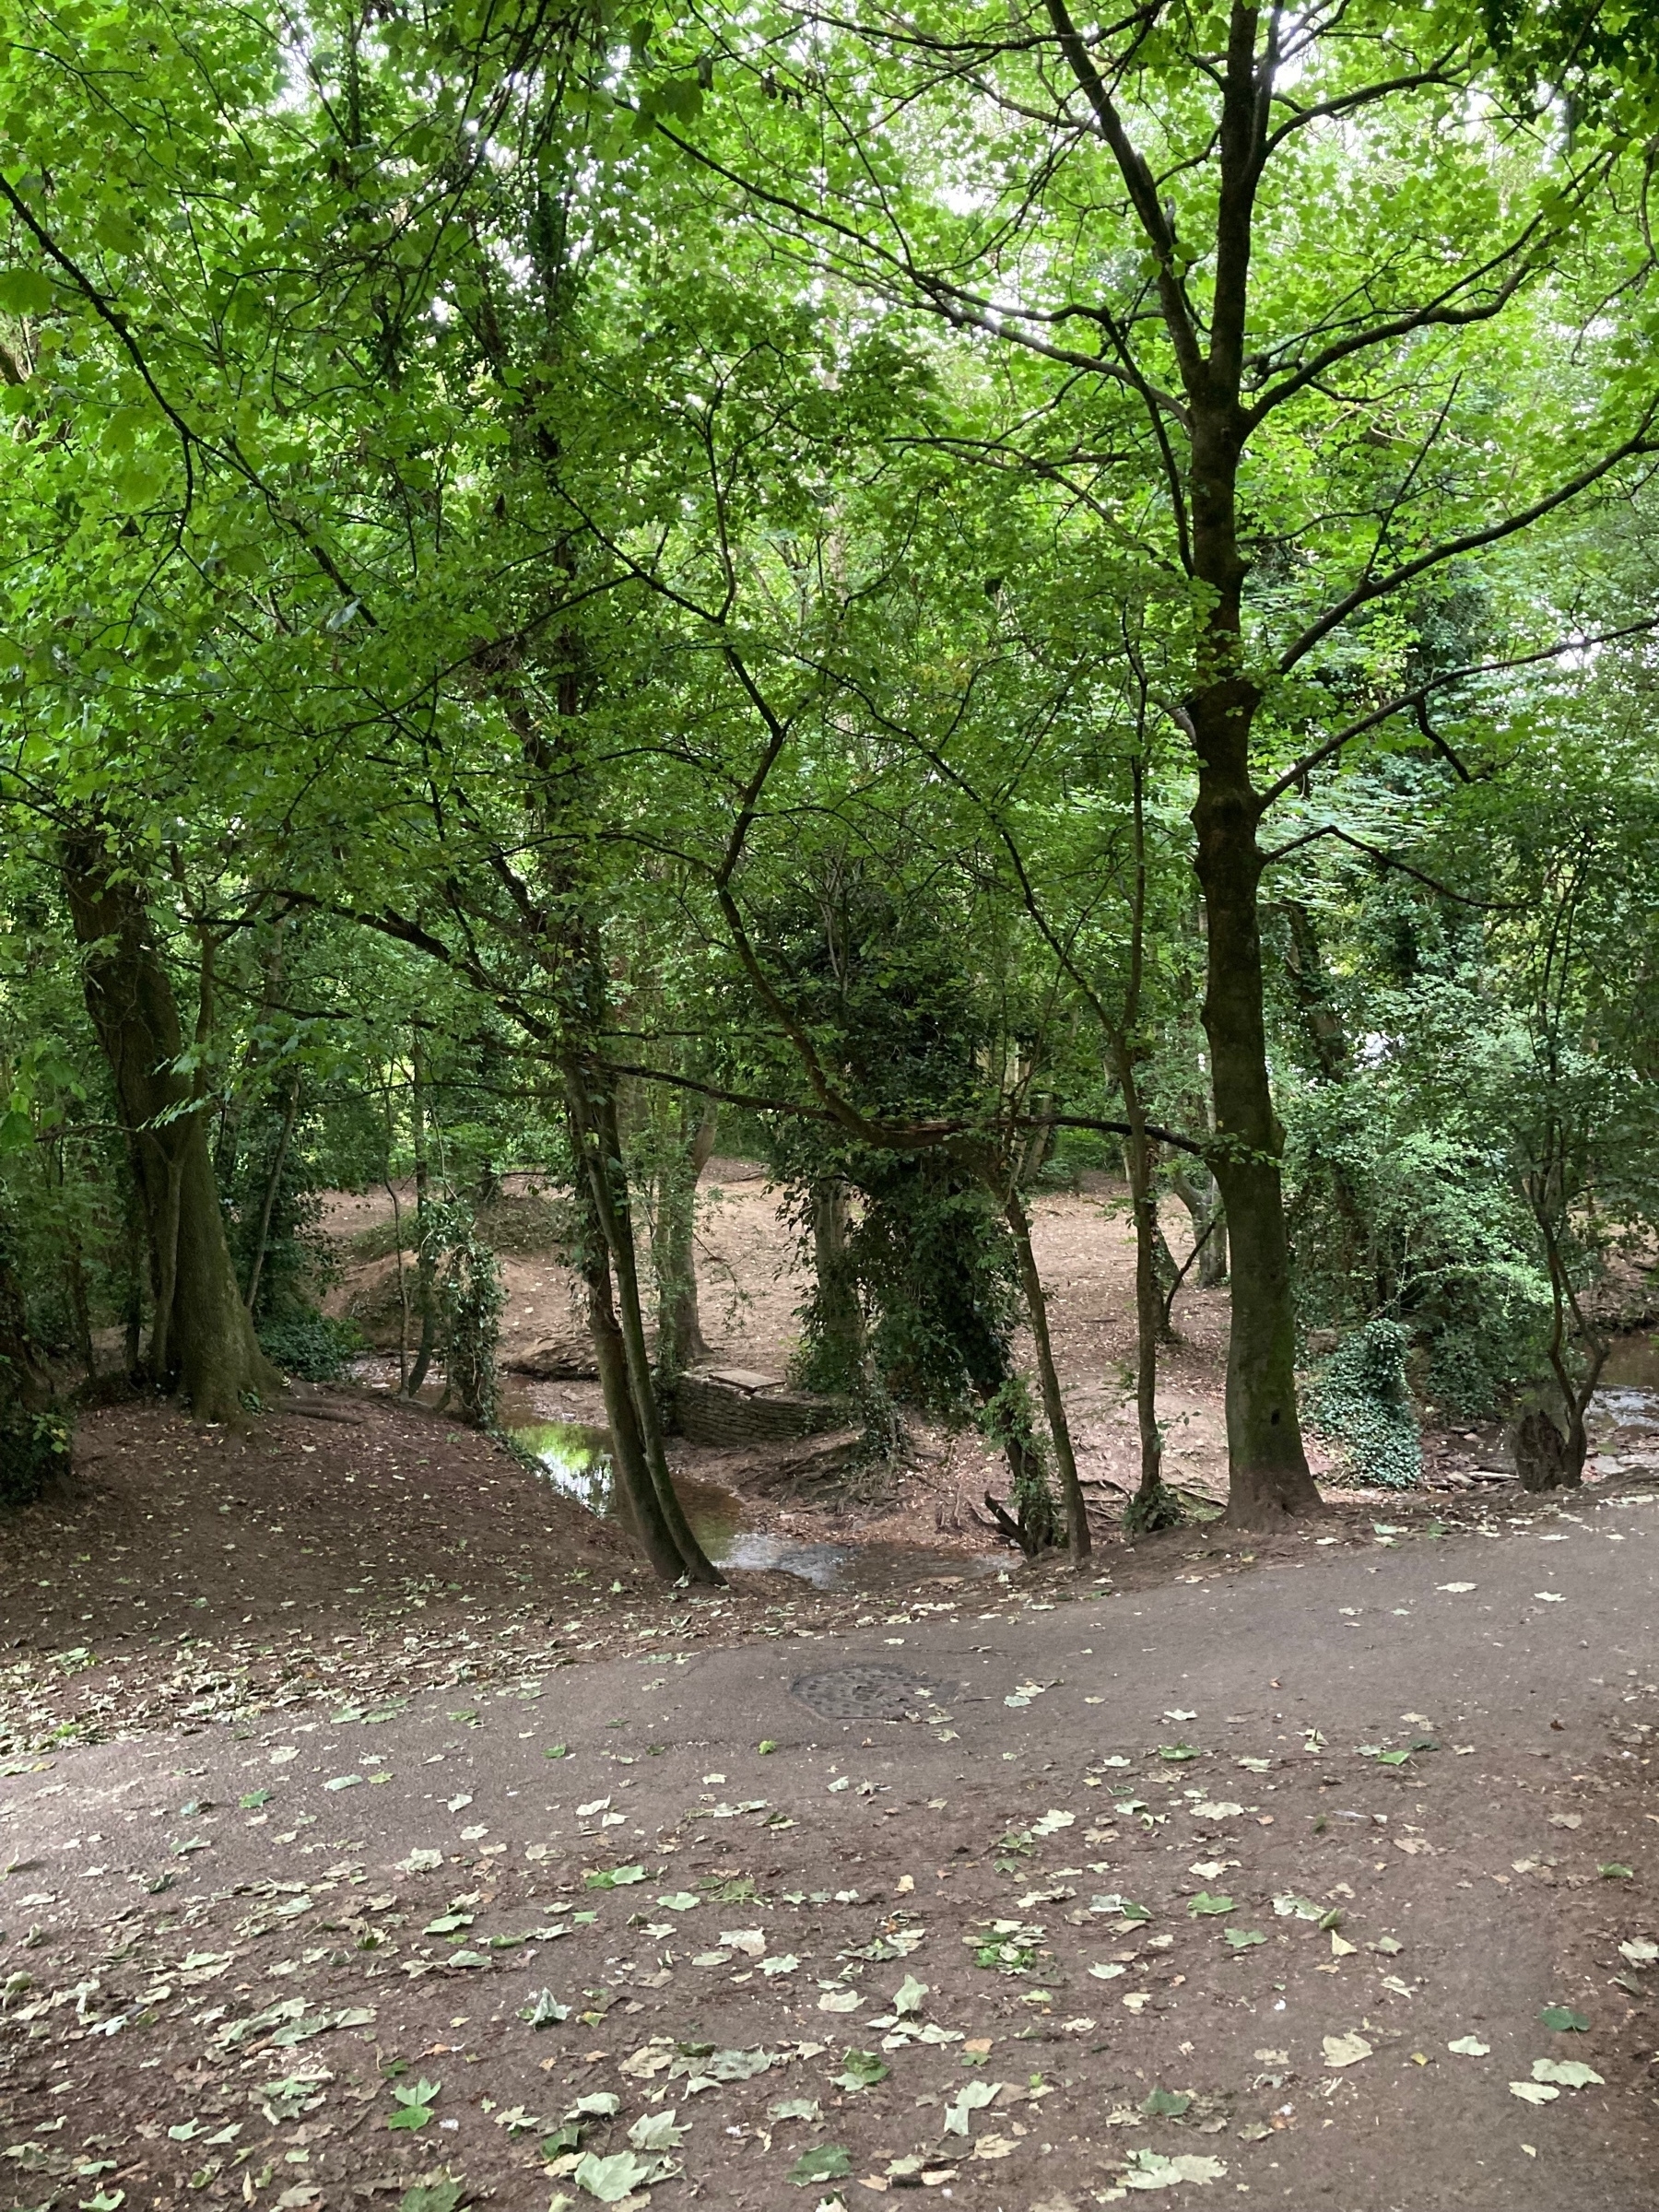 A wooded area, with a stream and natural footpaths.